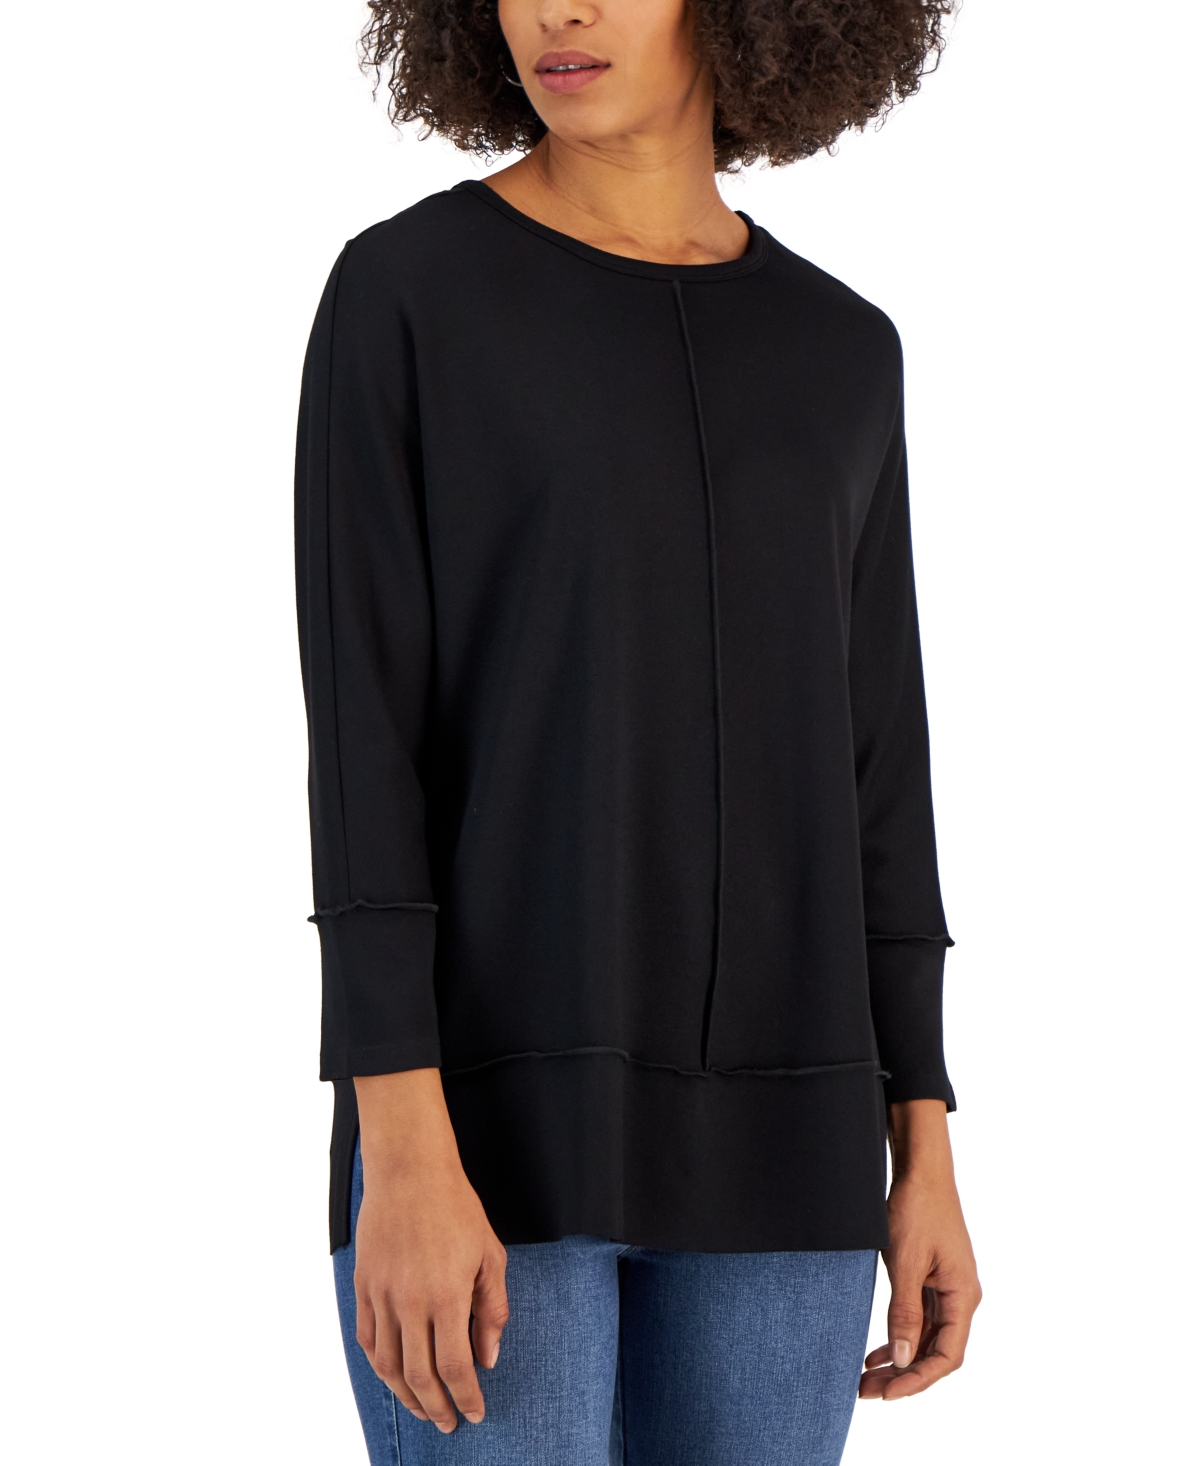 Jones New York Women's Serenity Knit Tunic with Three Quarter Length Dolman Sleeves and Seam Details